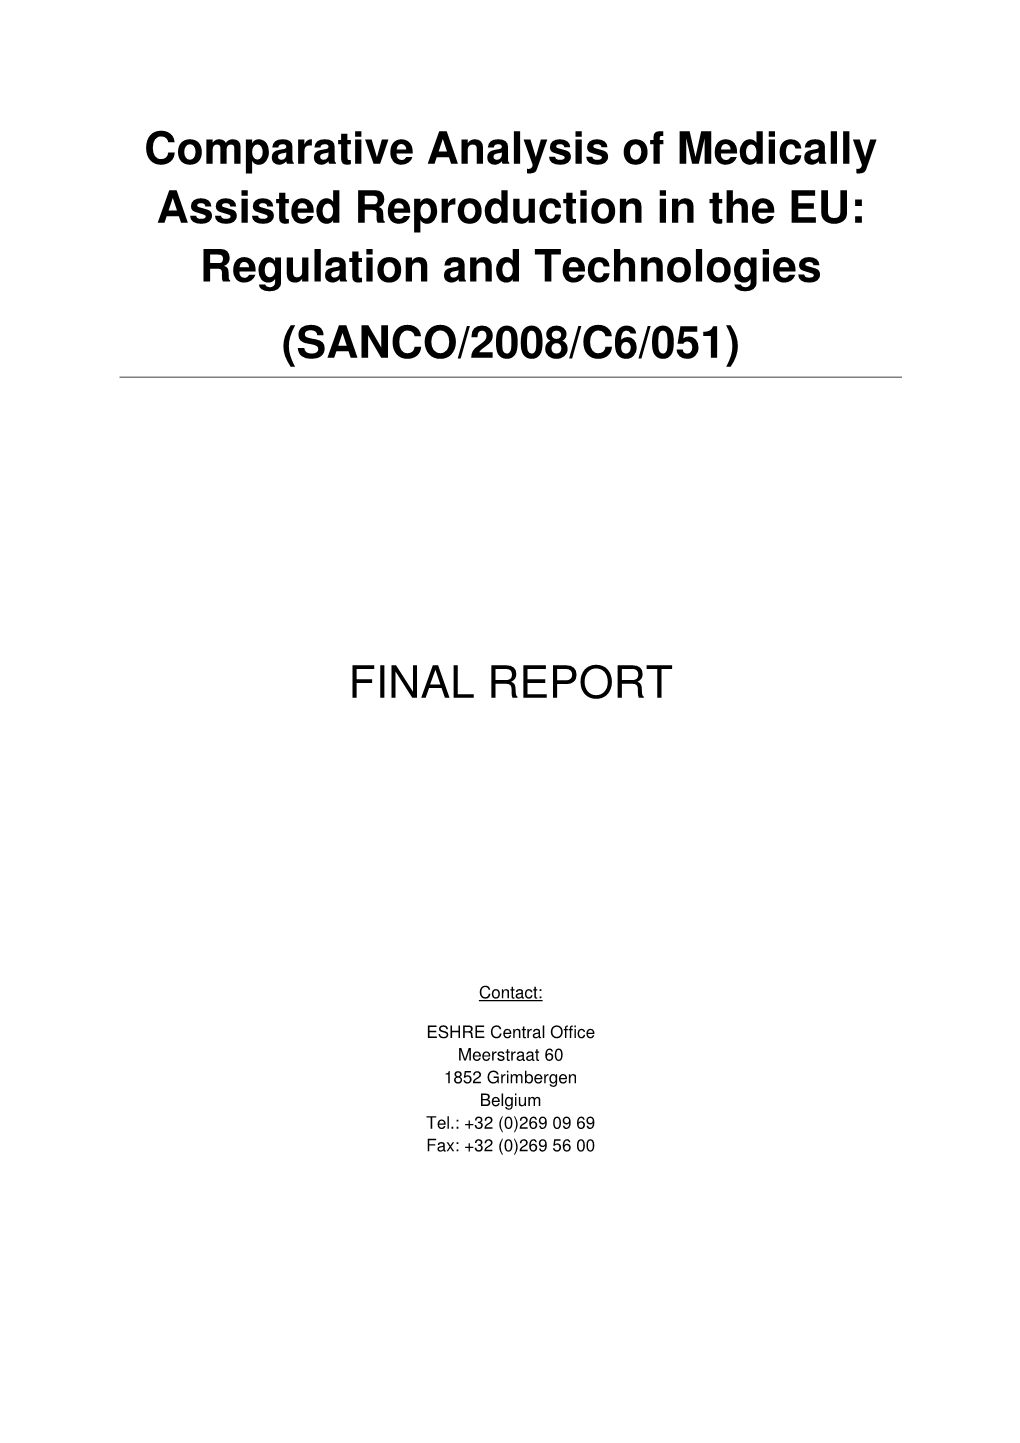 Comparative Analysis of Medically Assisted Reproduction in the EU: Regulation and Technologies (SANCO/2008/C6/051)